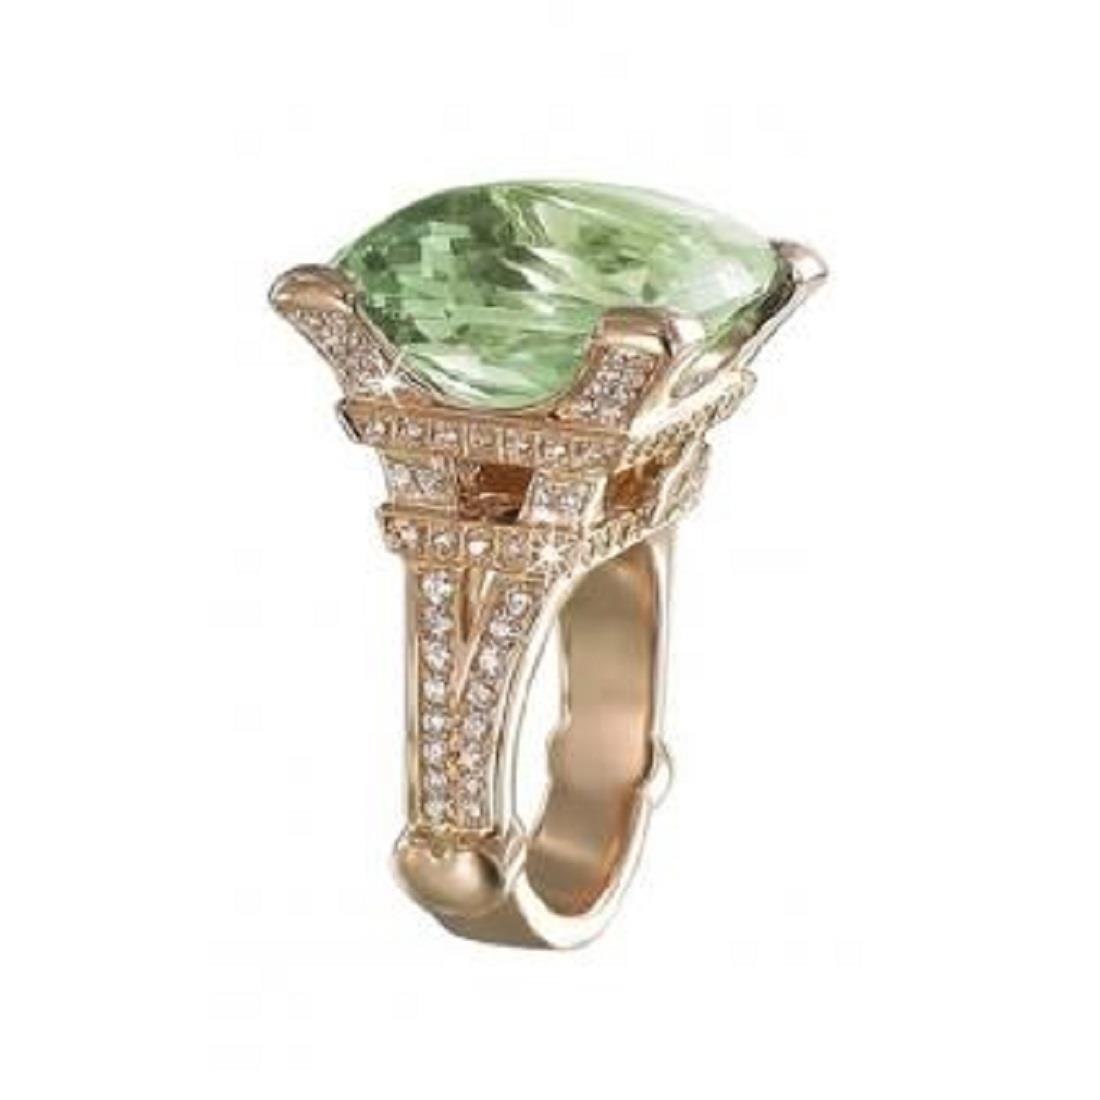 Madame Eiffel ring in red gold with diamonds and green quartz - PASQUALE BRUNI